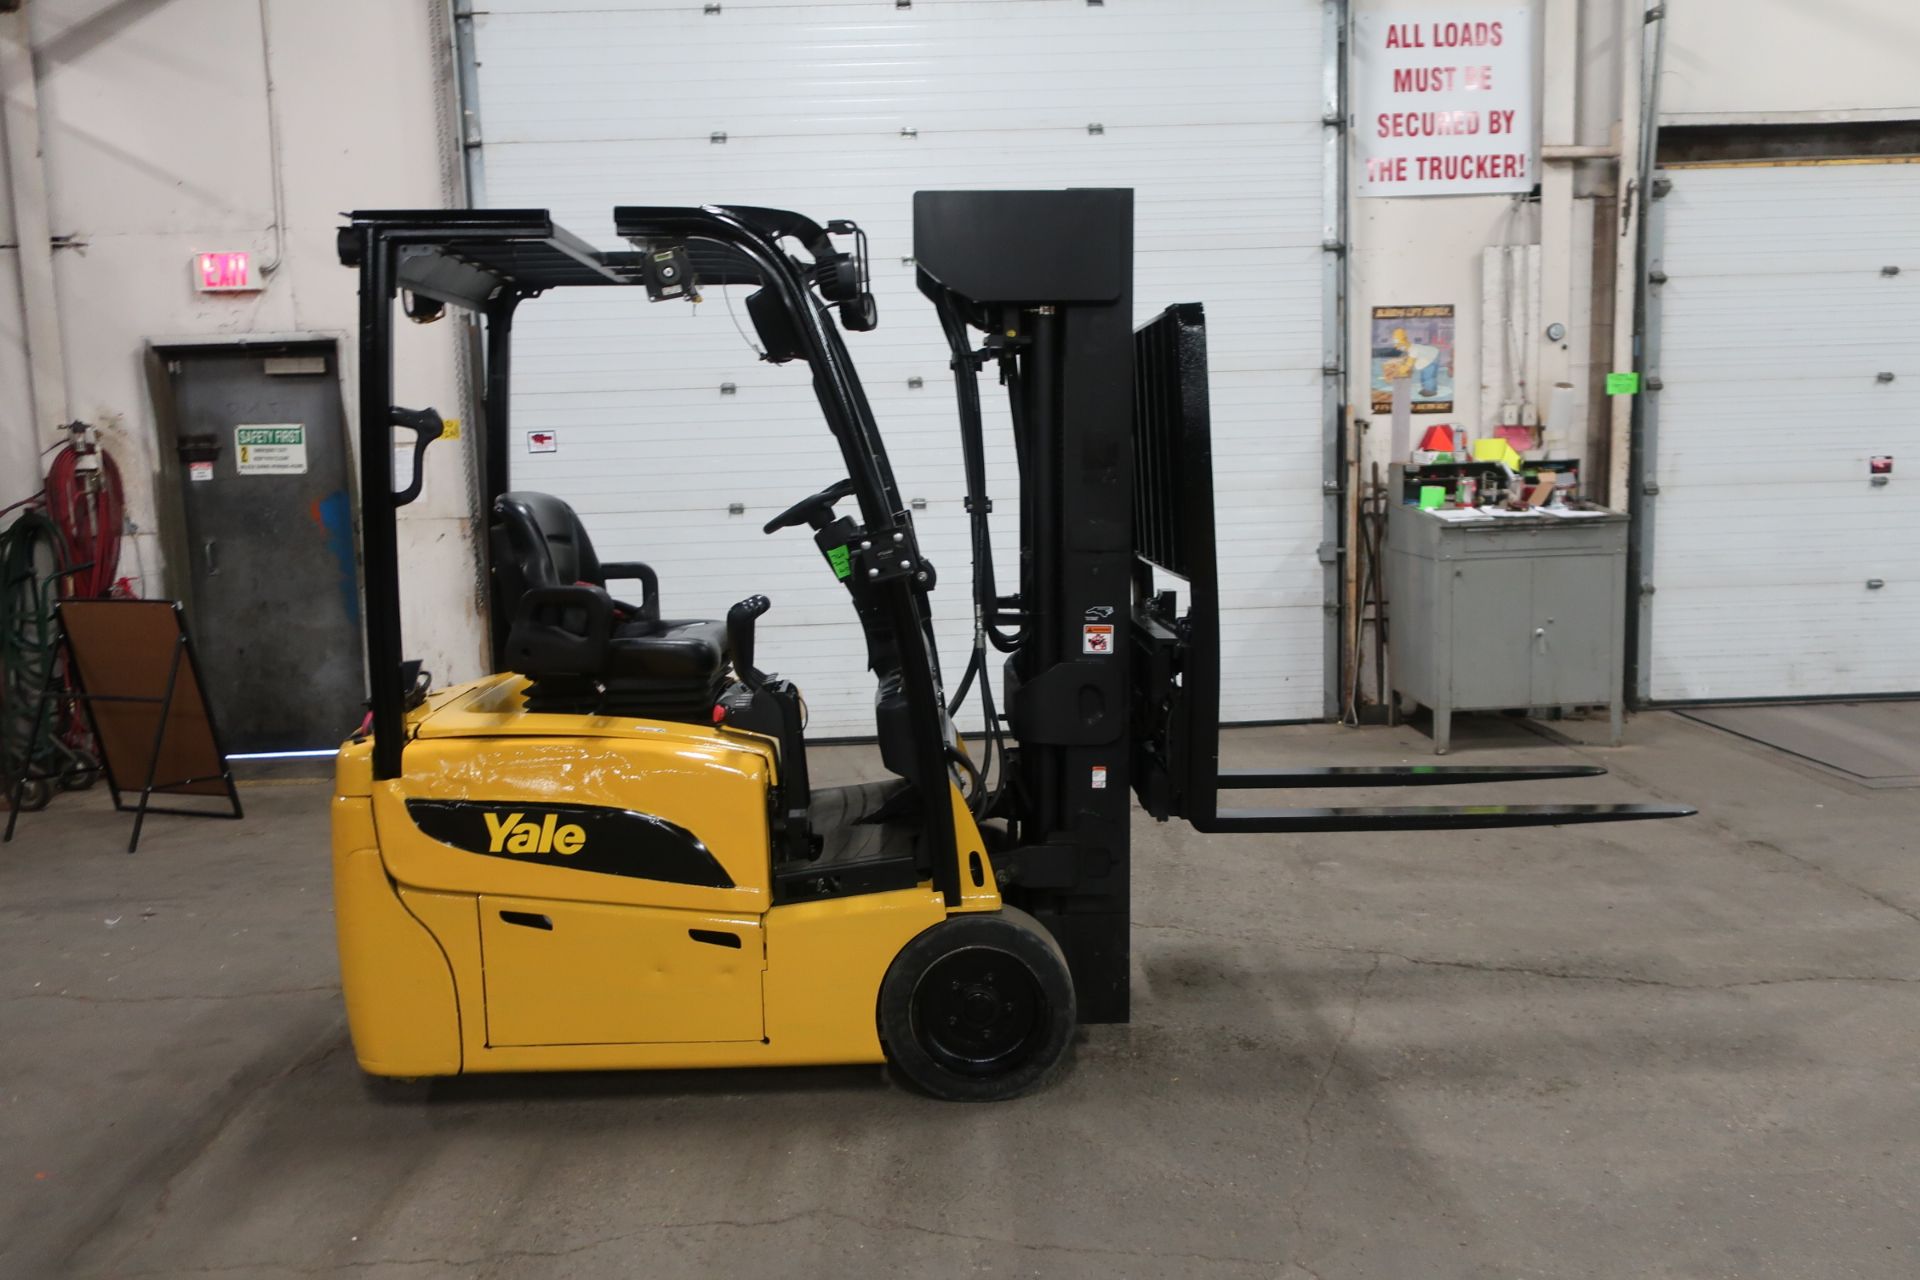 FREE CUSTOMS - 2014 Yale 3500lbs Forklift 3-Wheel unit with 4-stage Mast and Sideshift & Fork